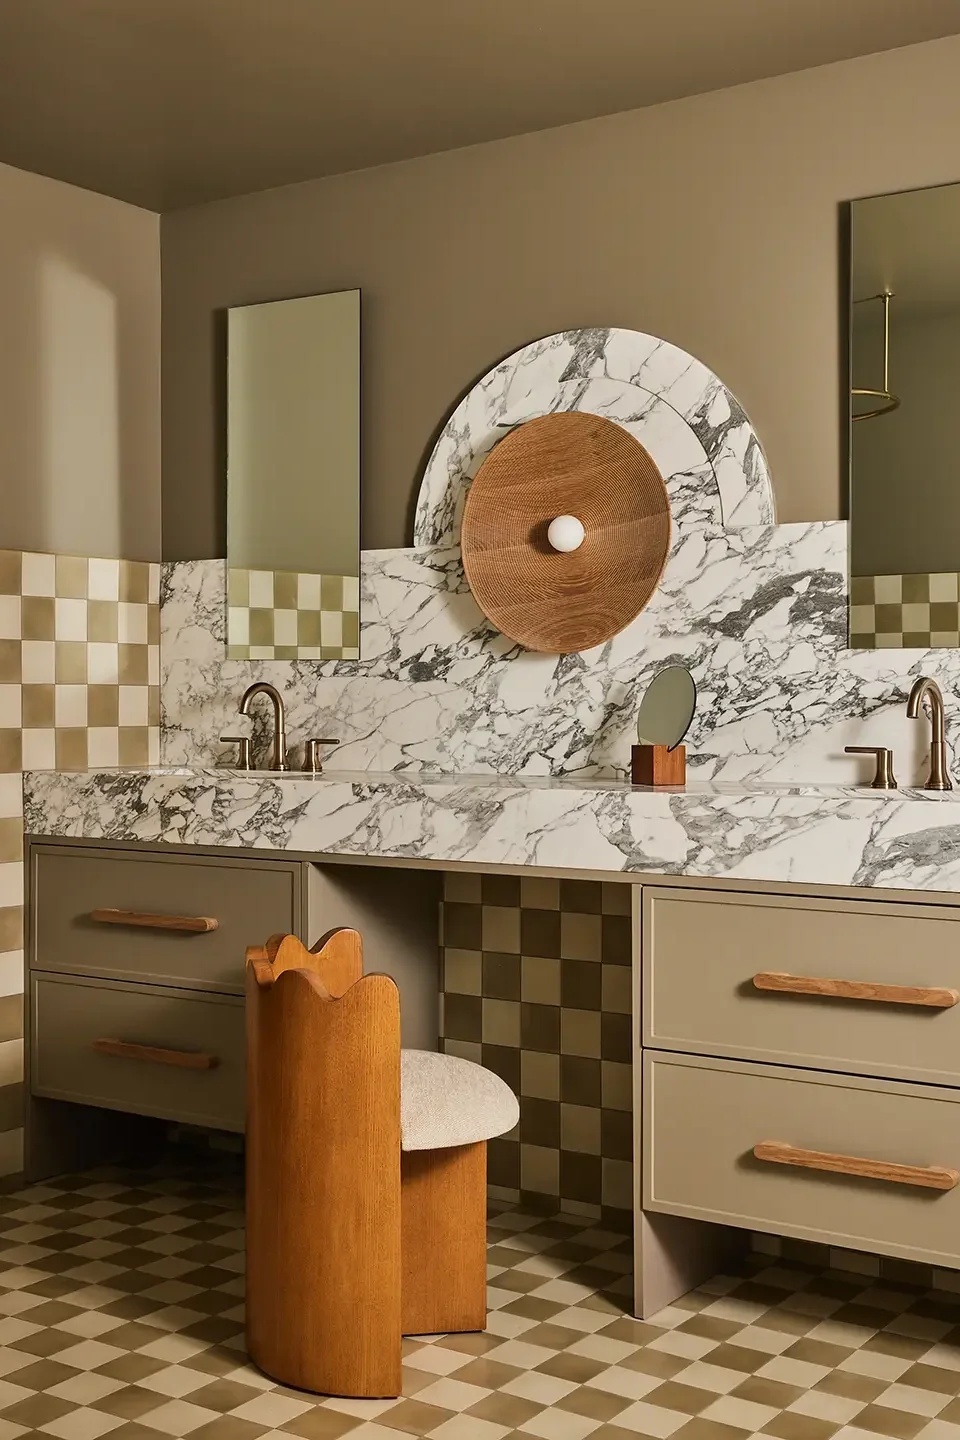 Bathroom with checkerboard tile, two vanities, and long marble countertop.